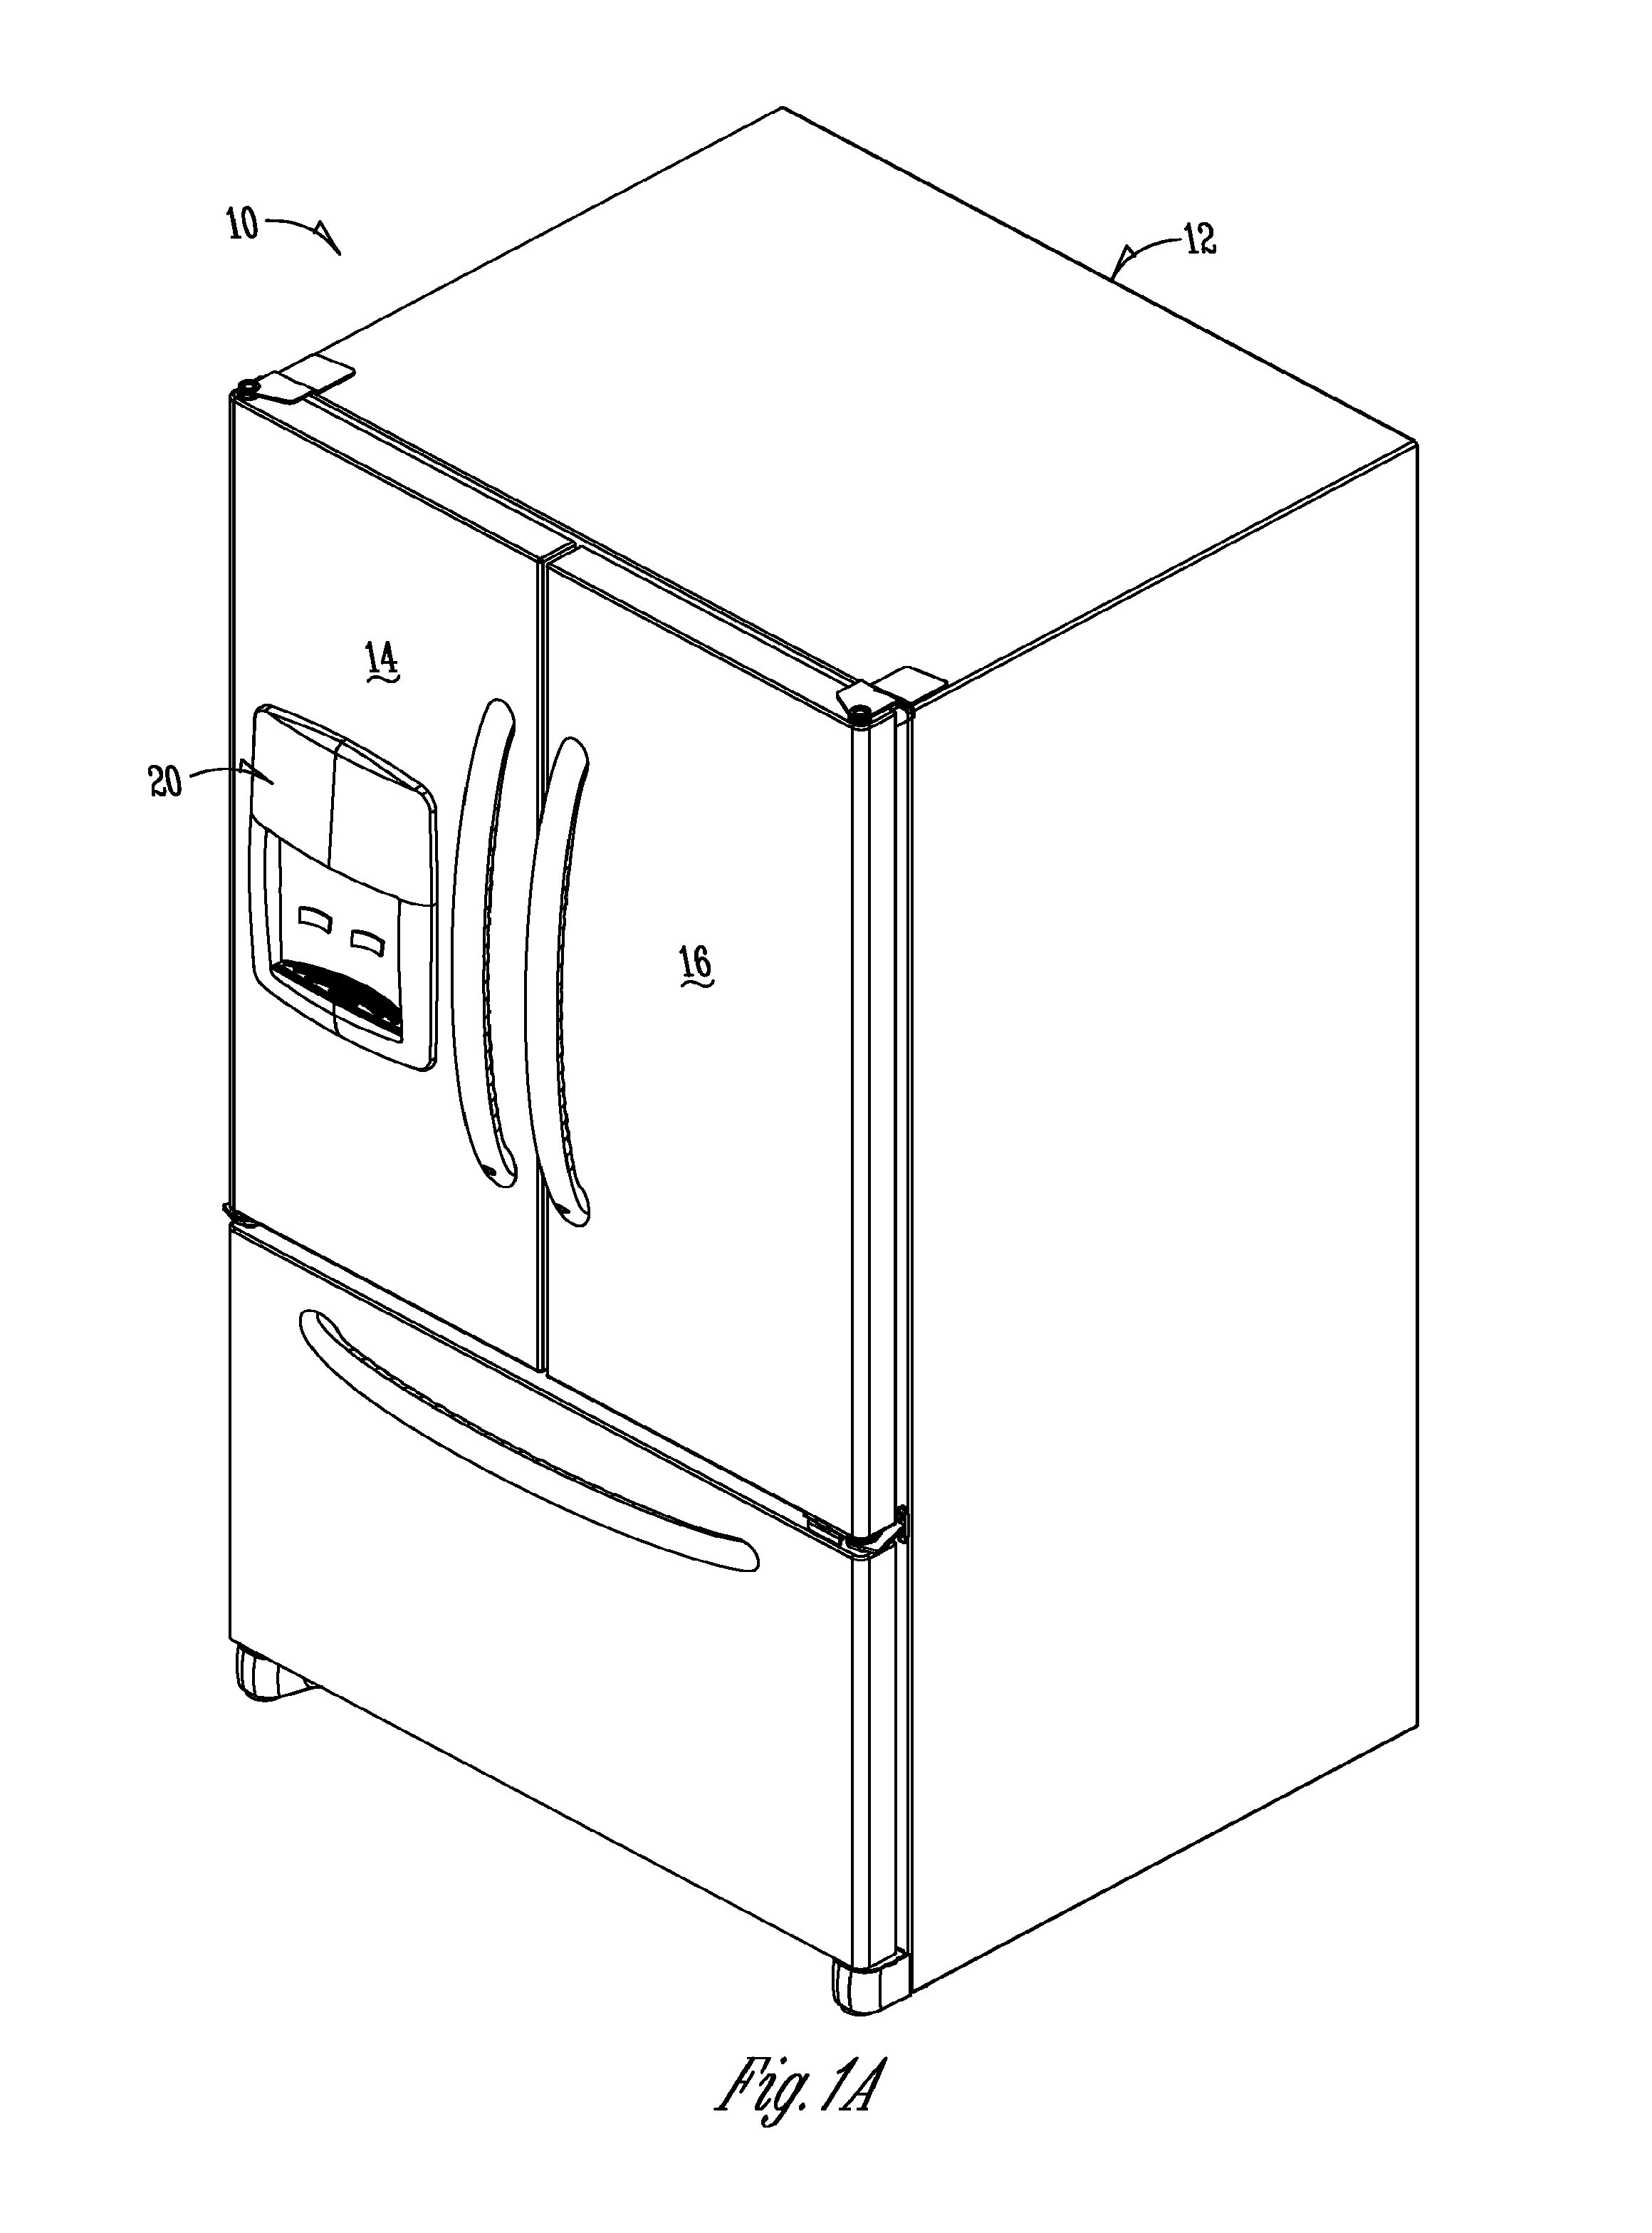 Two-plane door for refrigerator compartment